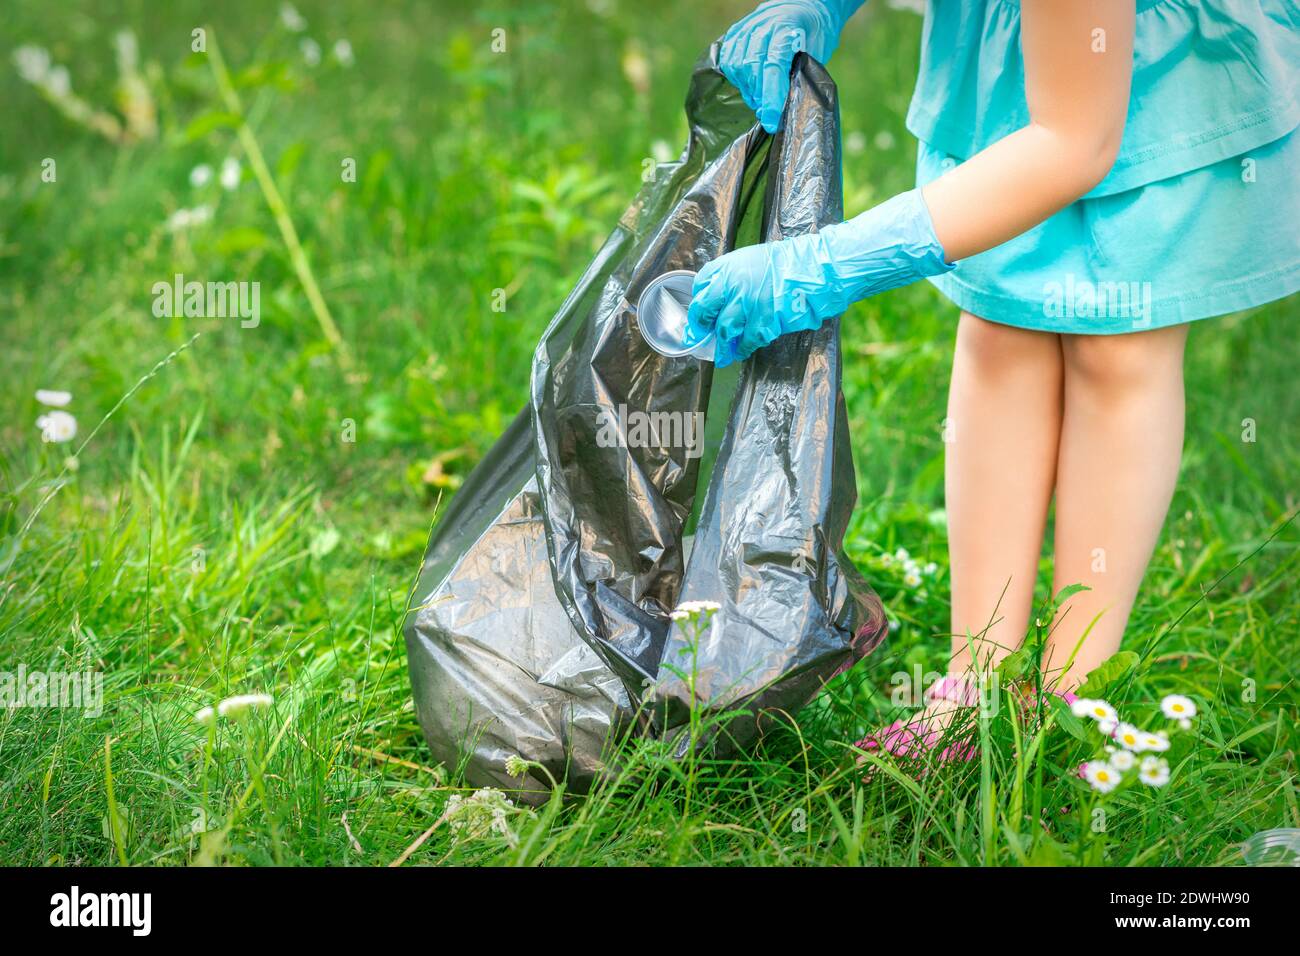 https://c8.alamy.com/comp/2DWHW90/childs-hand-puts-plastic-debris-in-the-garbage-bag-in-the-park-2DWHW90.jpg